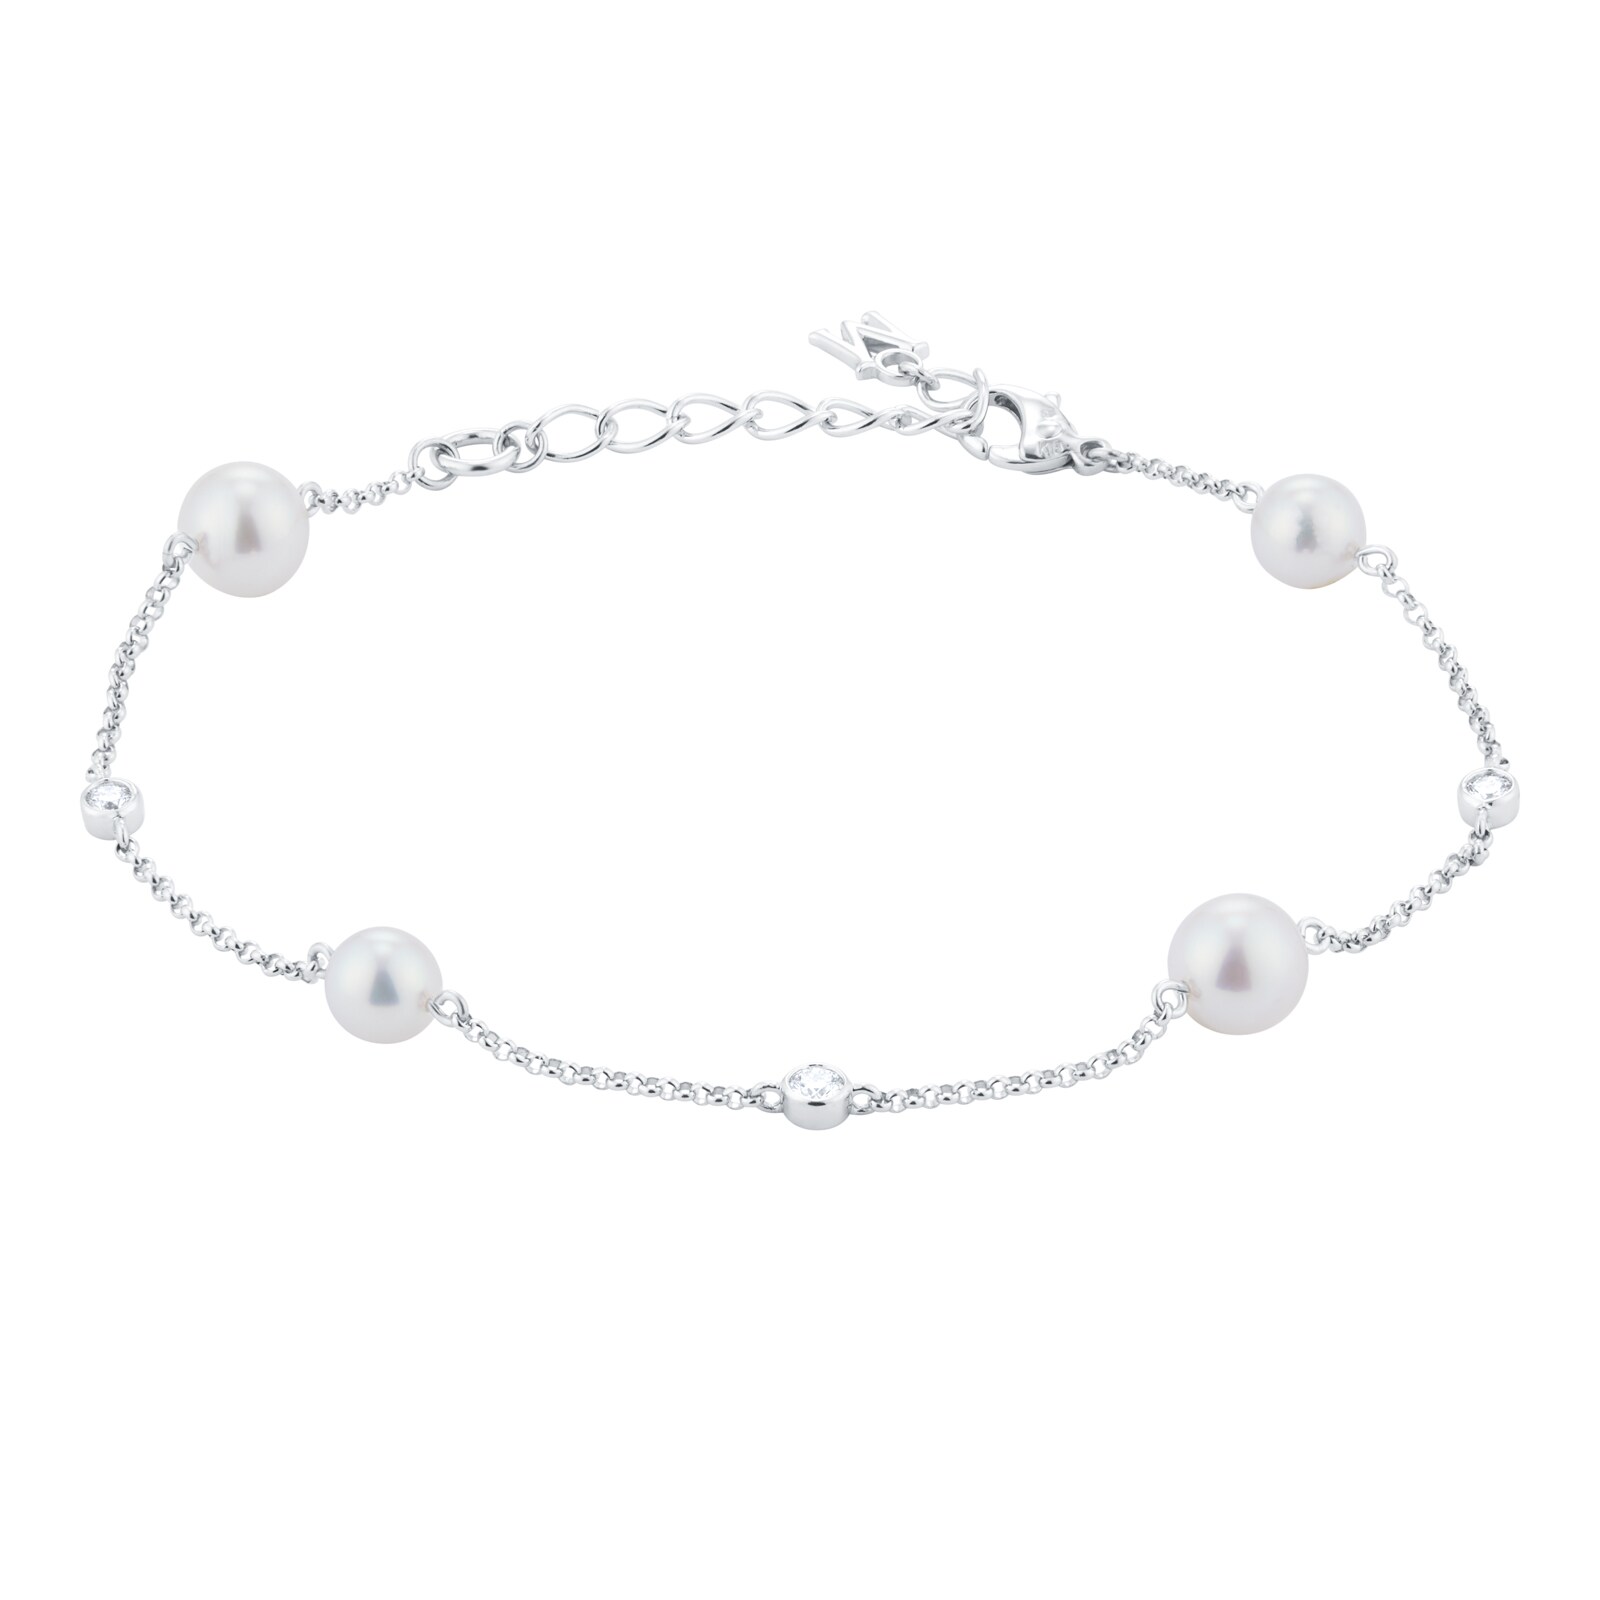 Top 10 Mikimoto Pearl Gifts for Valentine's Day - King Jewelers